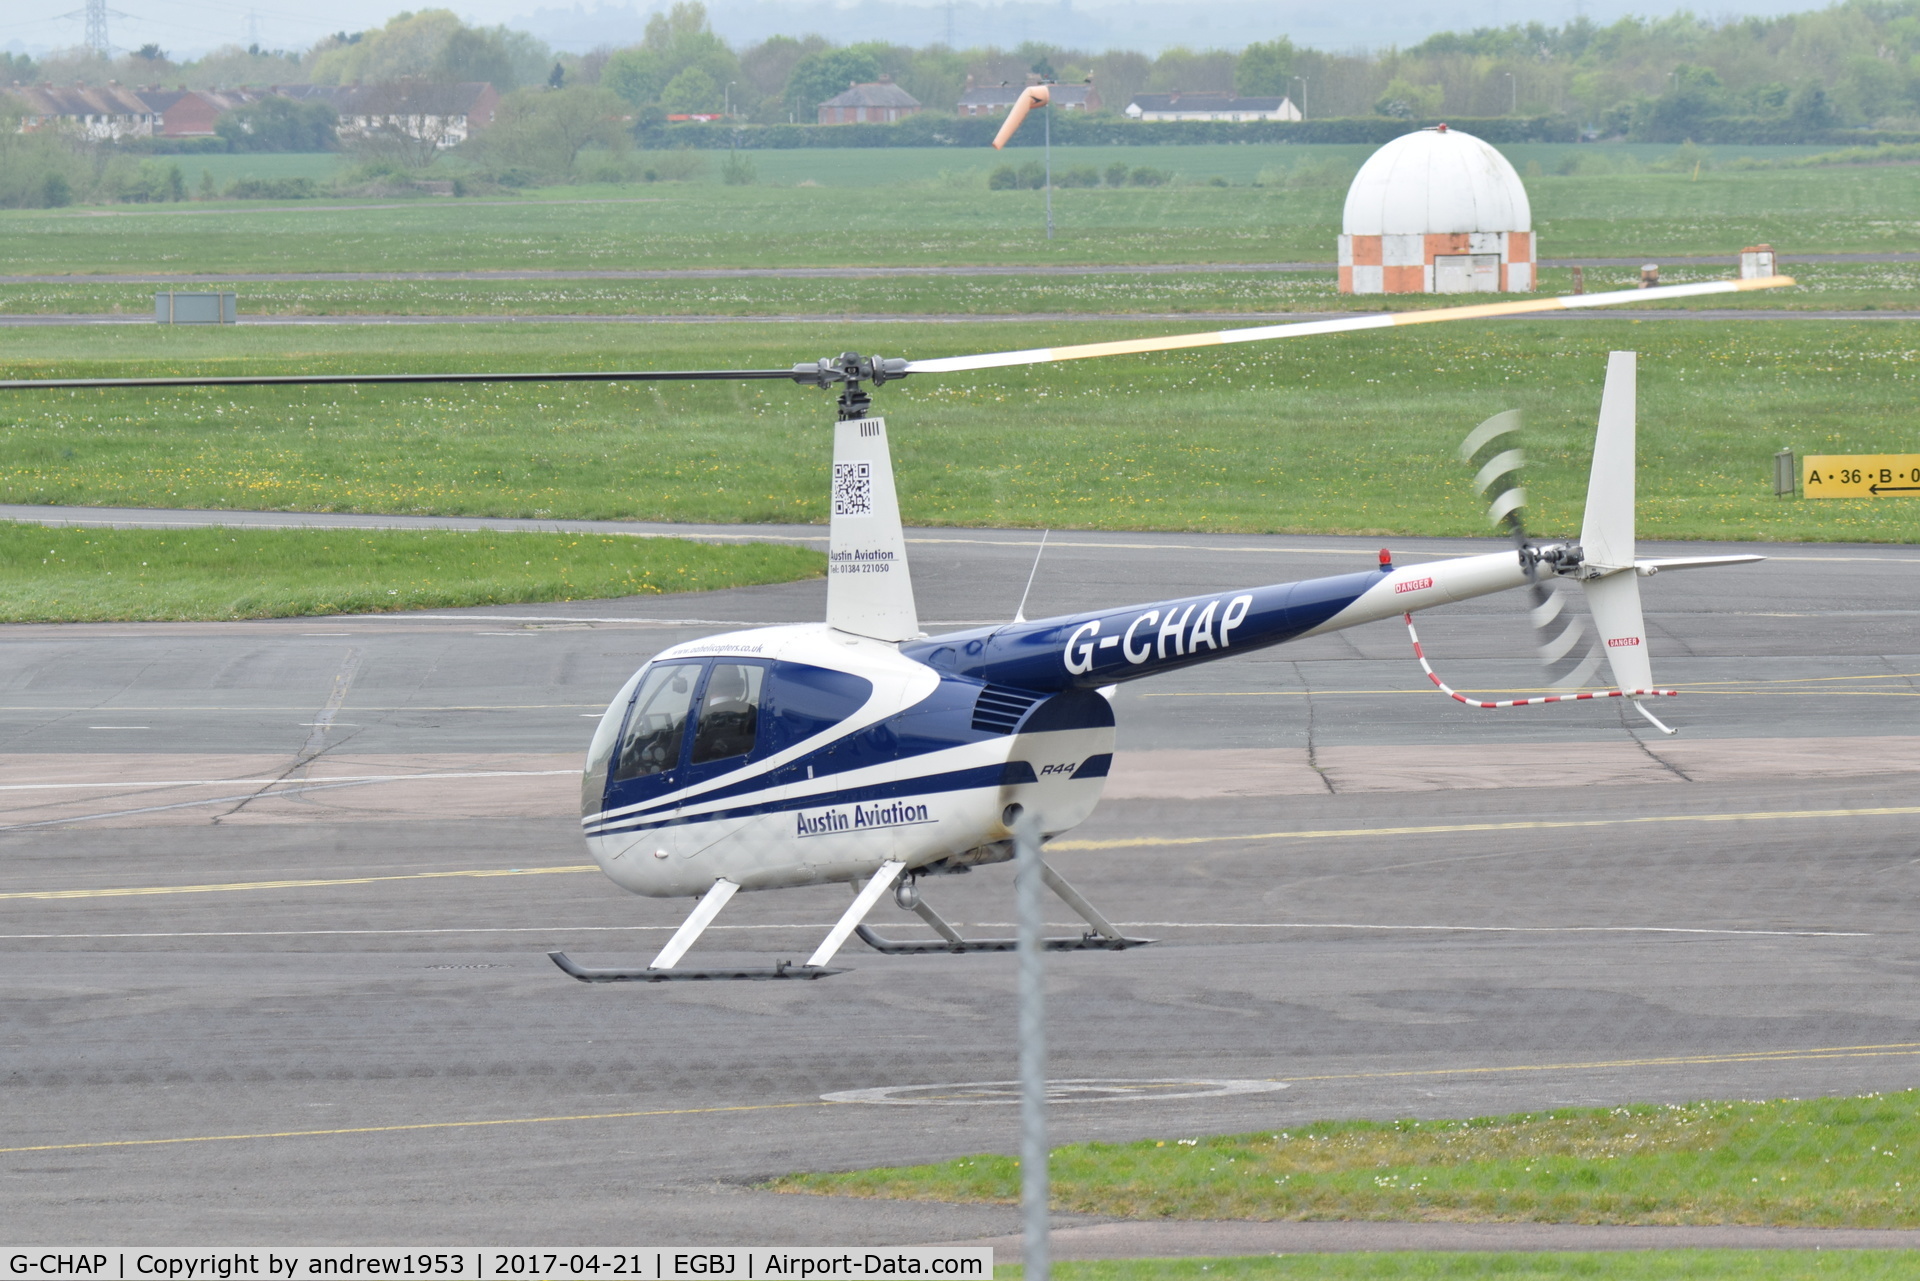 G-CHAP, 1997 Robinson R44 Astro C/N 0326, G-CHAP at Gloucestershire Airport.